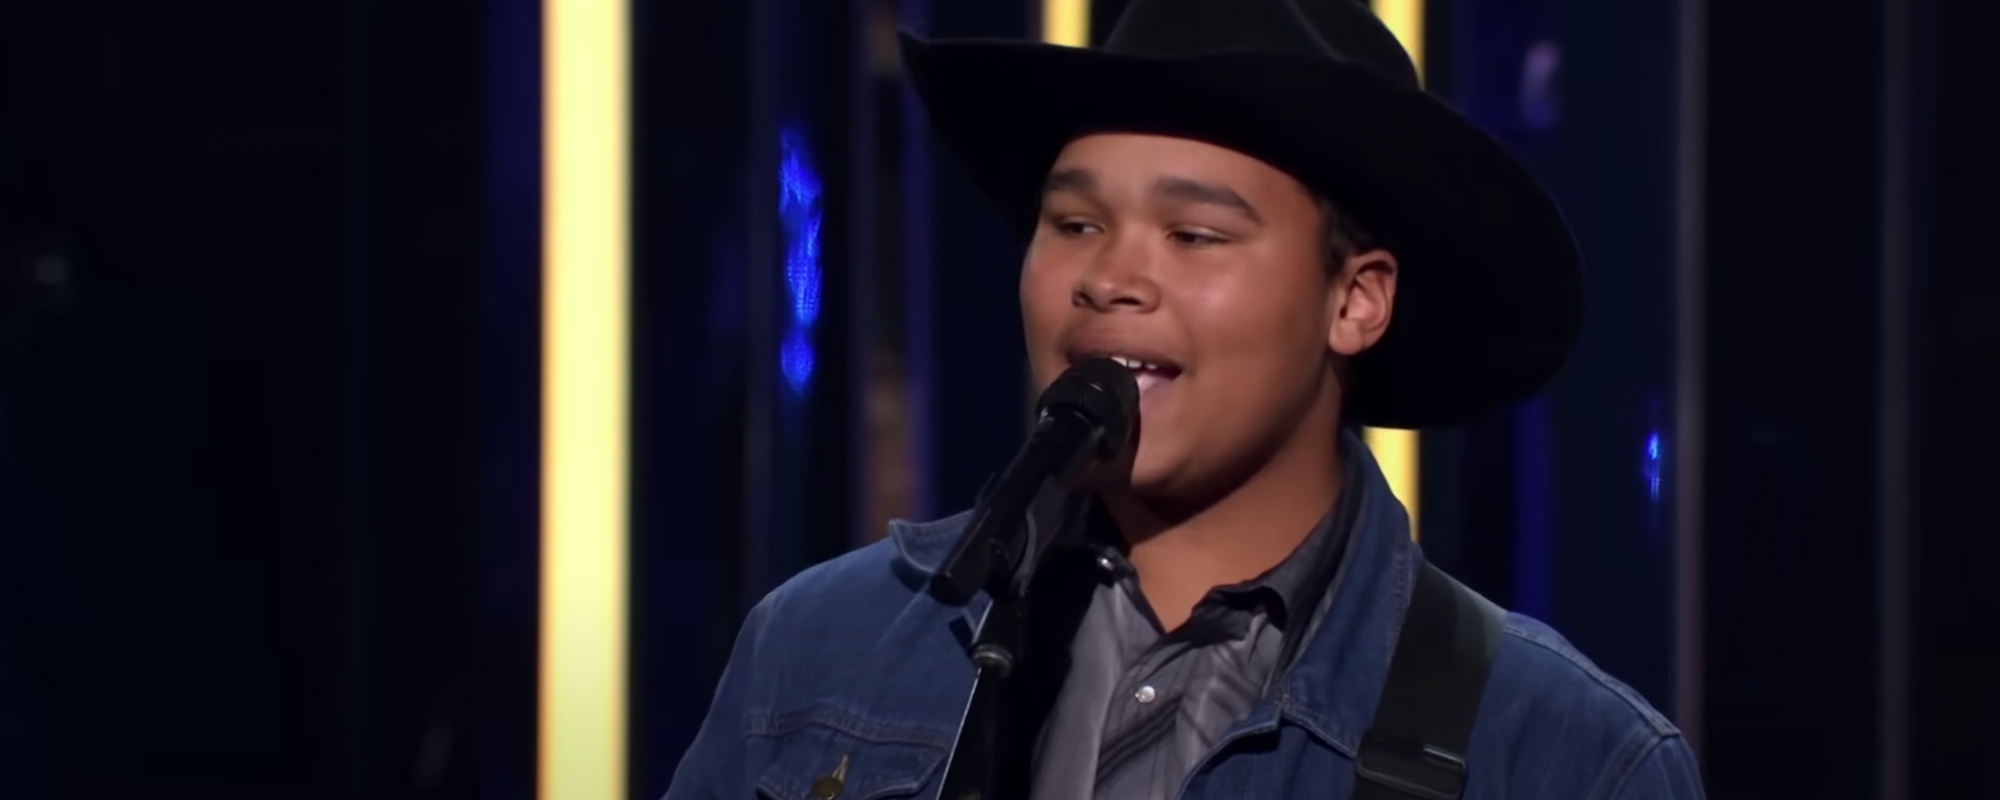 ‘American Idol’ Fans Dub 15-Year-Old Phenom Triston Harper the “New Garth Brooks”; Ex-NFL Player Heads to the Top 24